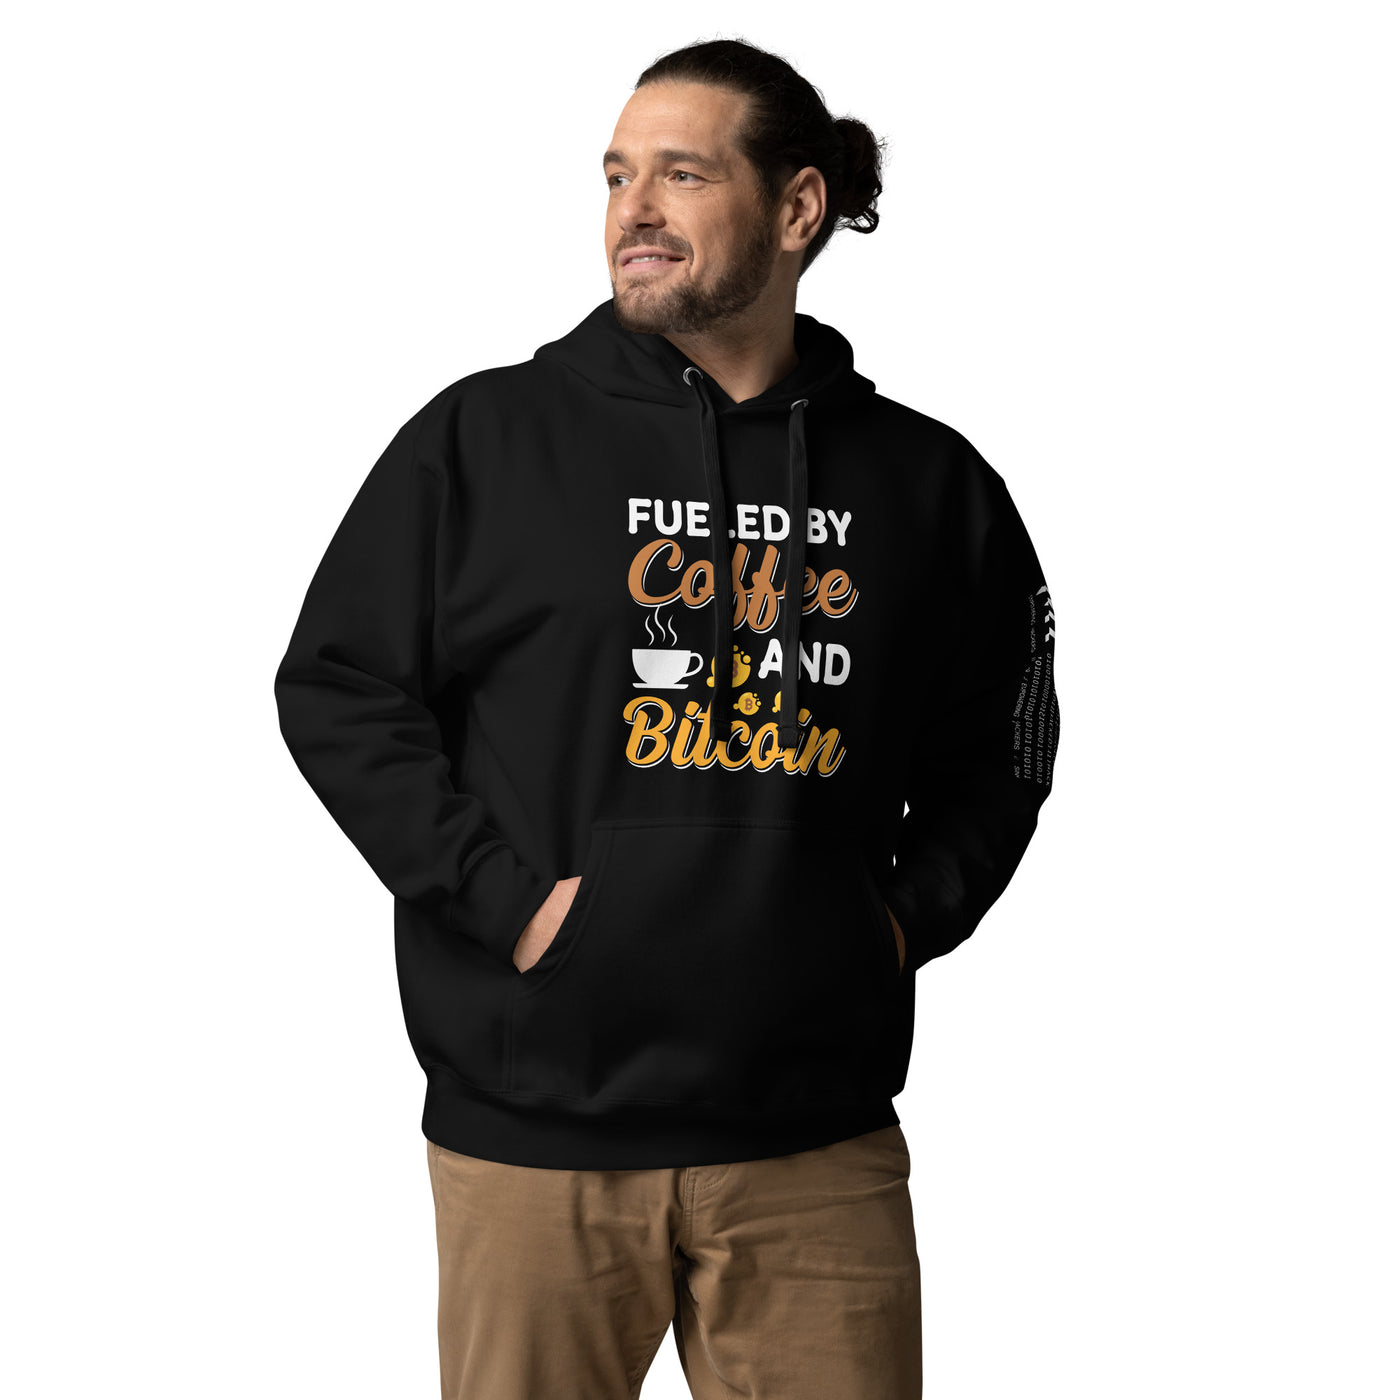 Fueled by Coffee and Bitcoin V1 - Unisex Hoodie